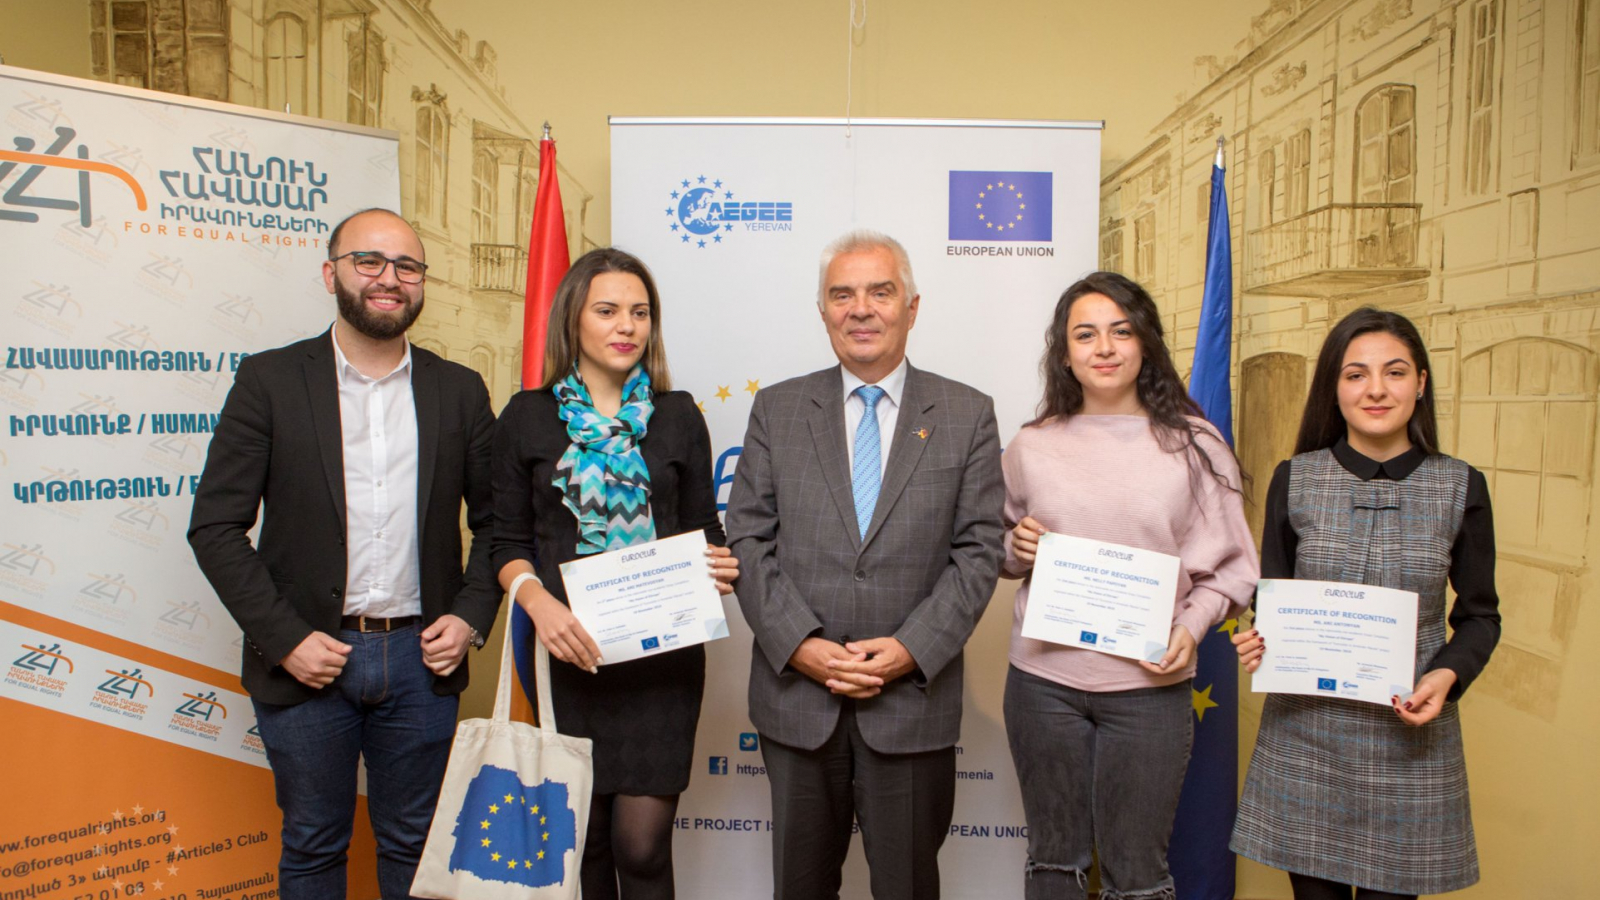 Armenia: EU presents awards to winners of “My vision of Europe” essay competition